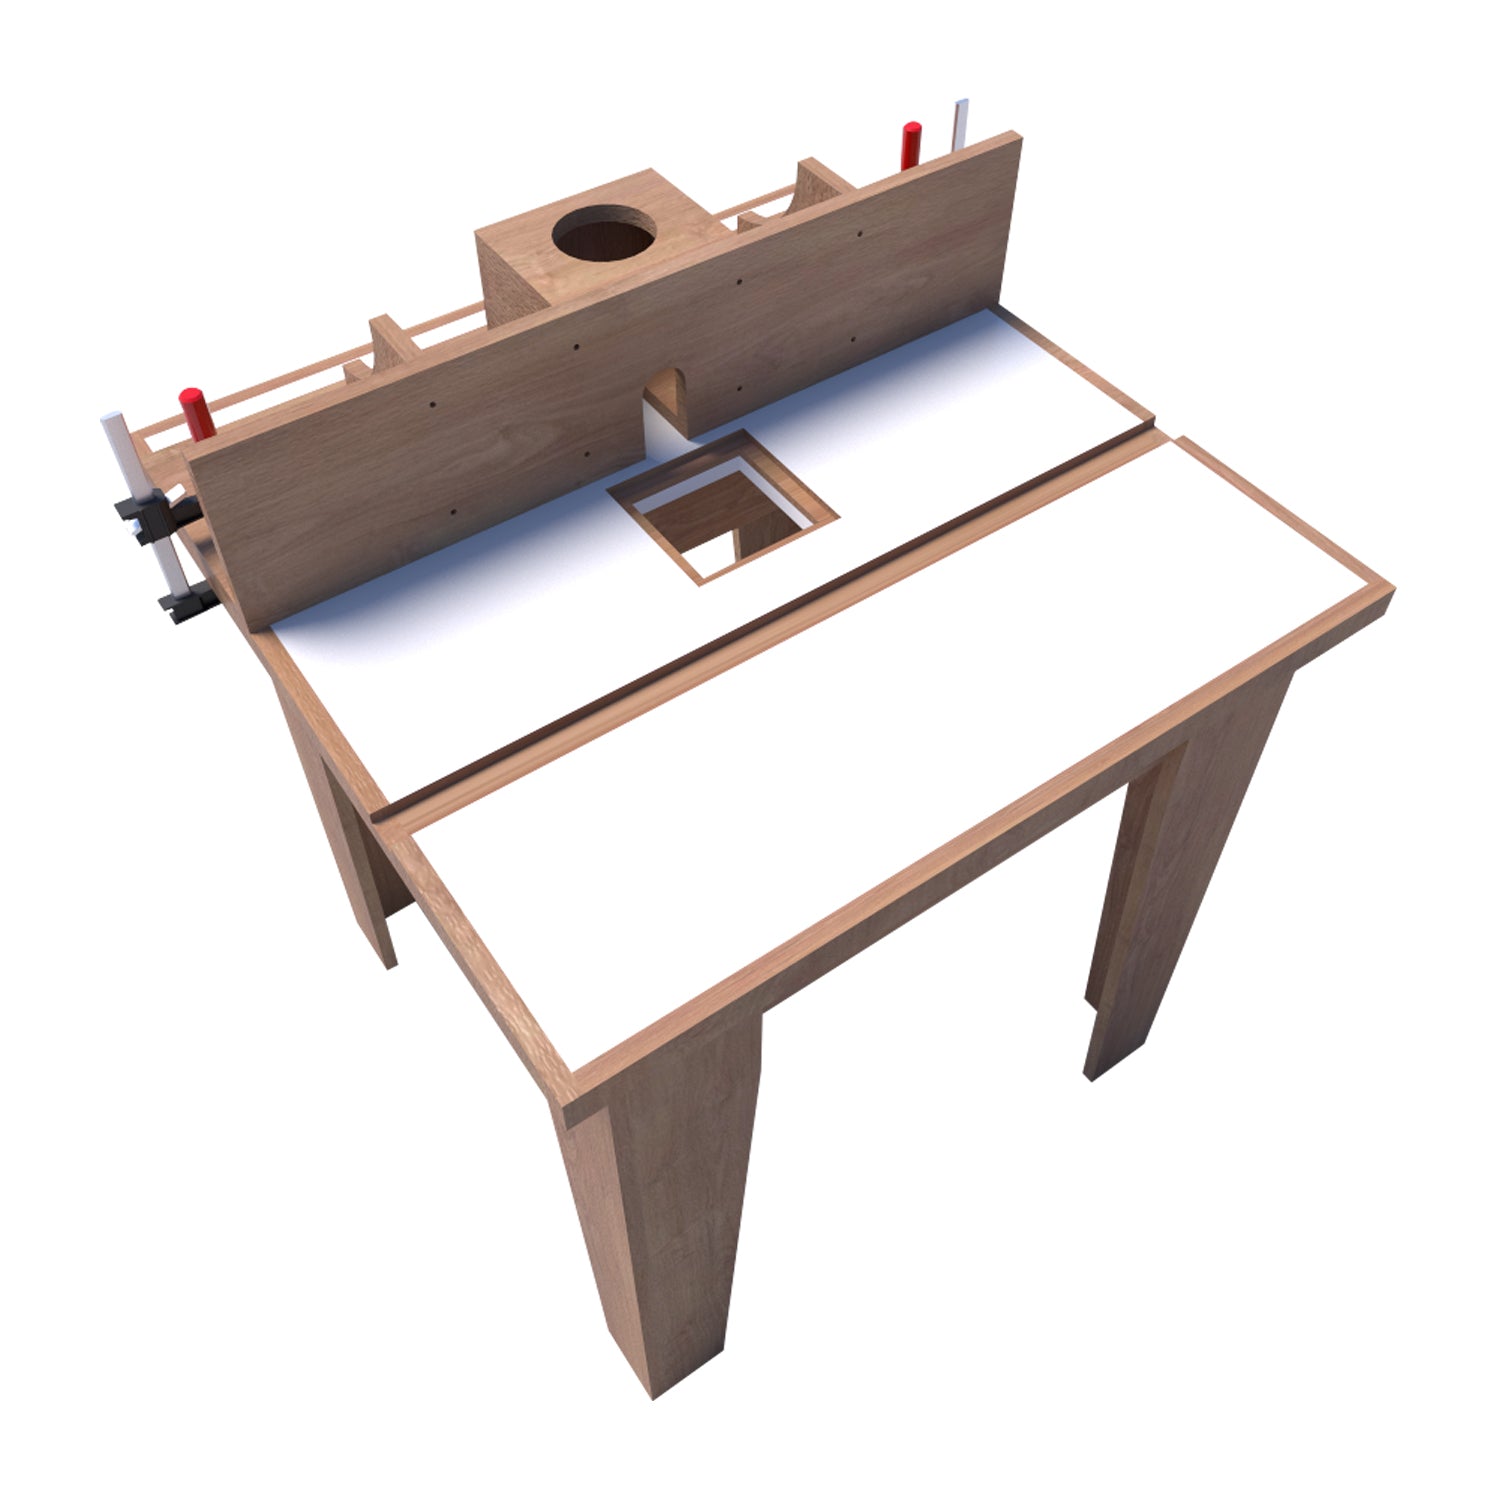 New Tool for Cutting Cardboard It's like a Router Table for Cardboard :  r/TerrainBuilding